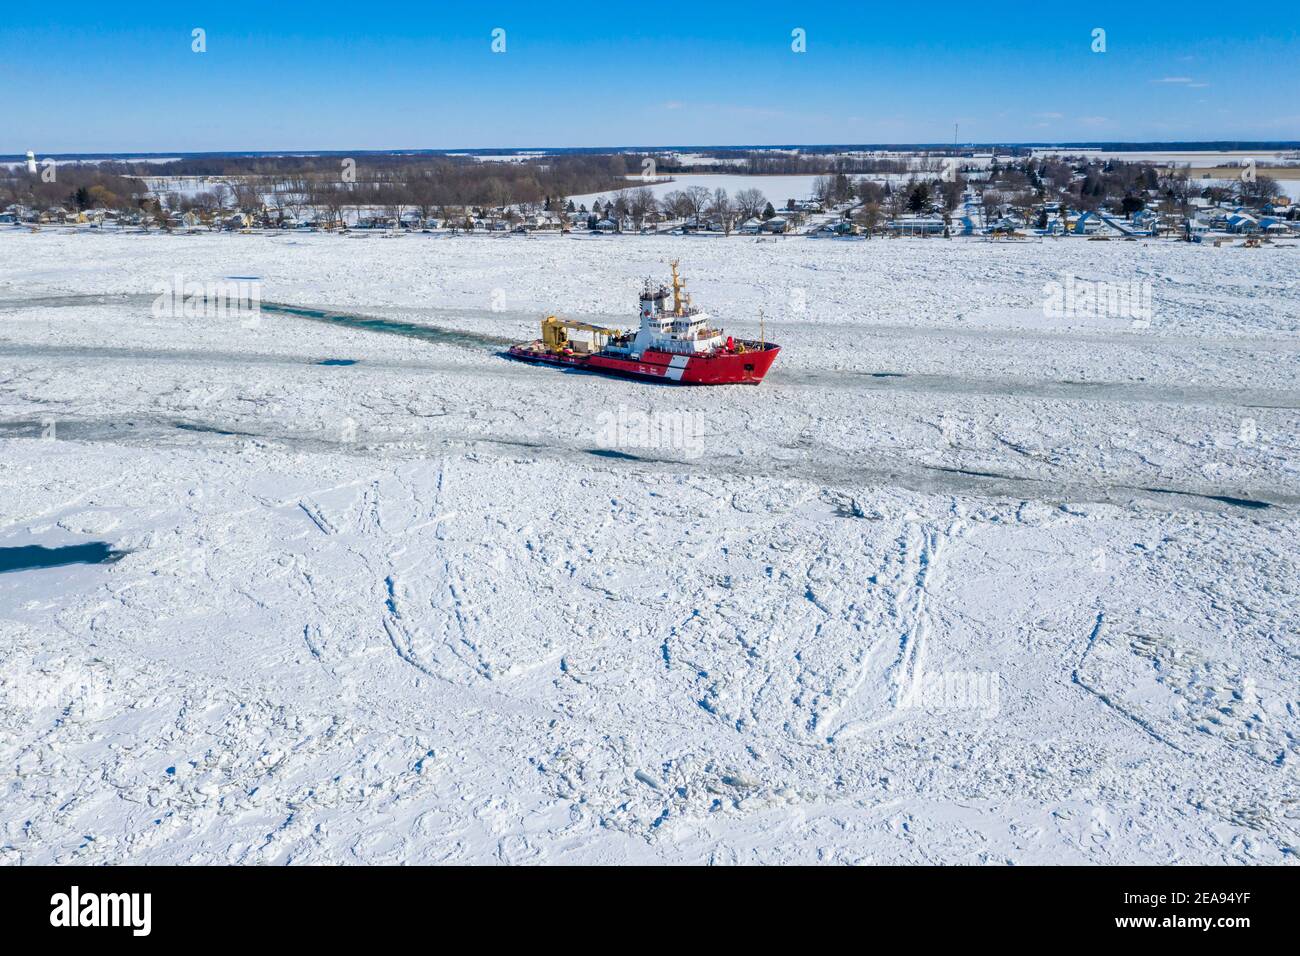 Roberts Landing, Michigan, USA. 7th Feb, 2021. The Canadian Coast Guard icebreaker Samuel Risley breaks up ice on the St. Clair River. Bitter cold has led to ice jams on the river and flooding in shoreline communities. The St. Clair River is the border between the U.S. and Canada; it drains the upper Great Lakes towards Lake St. Clair and on to Lake Erie. Credit: Jim West/Alamy Live News Stock Photo